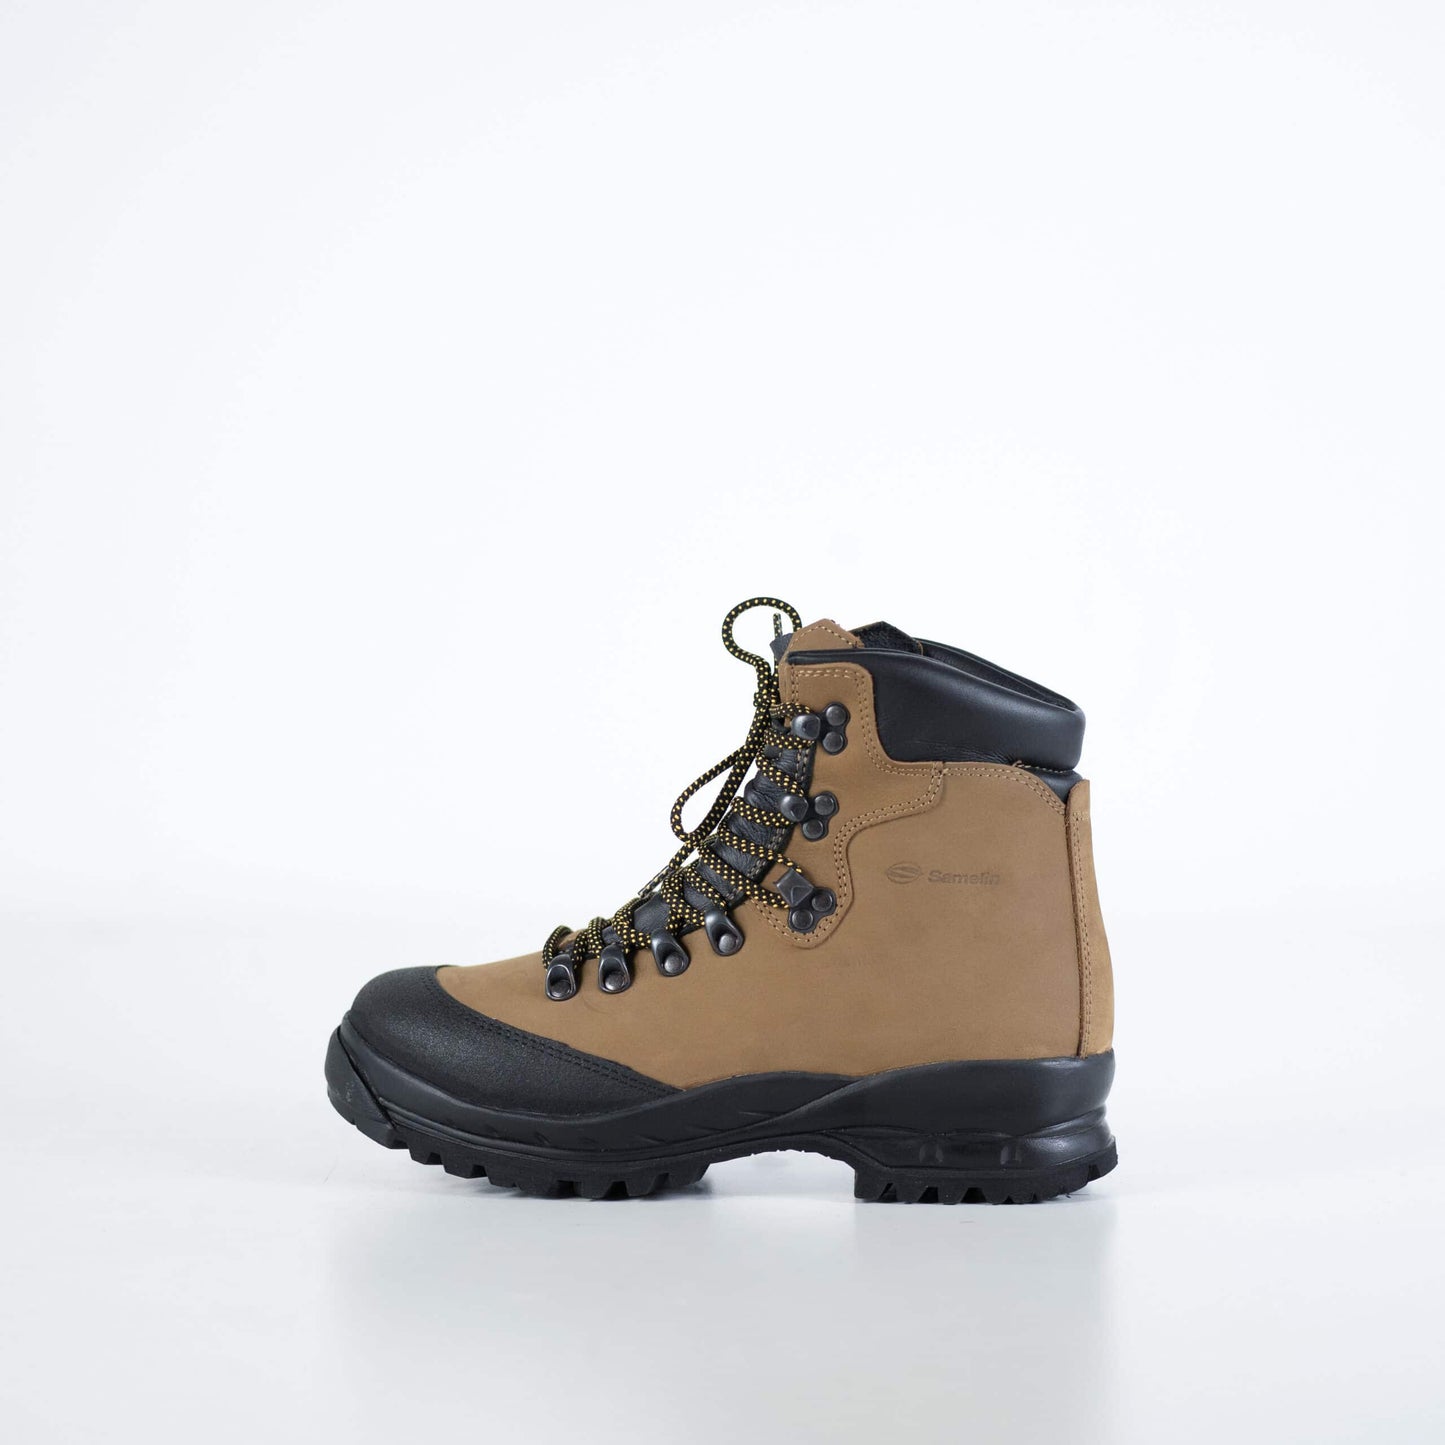 553P Tundra Hiking Boots with protector